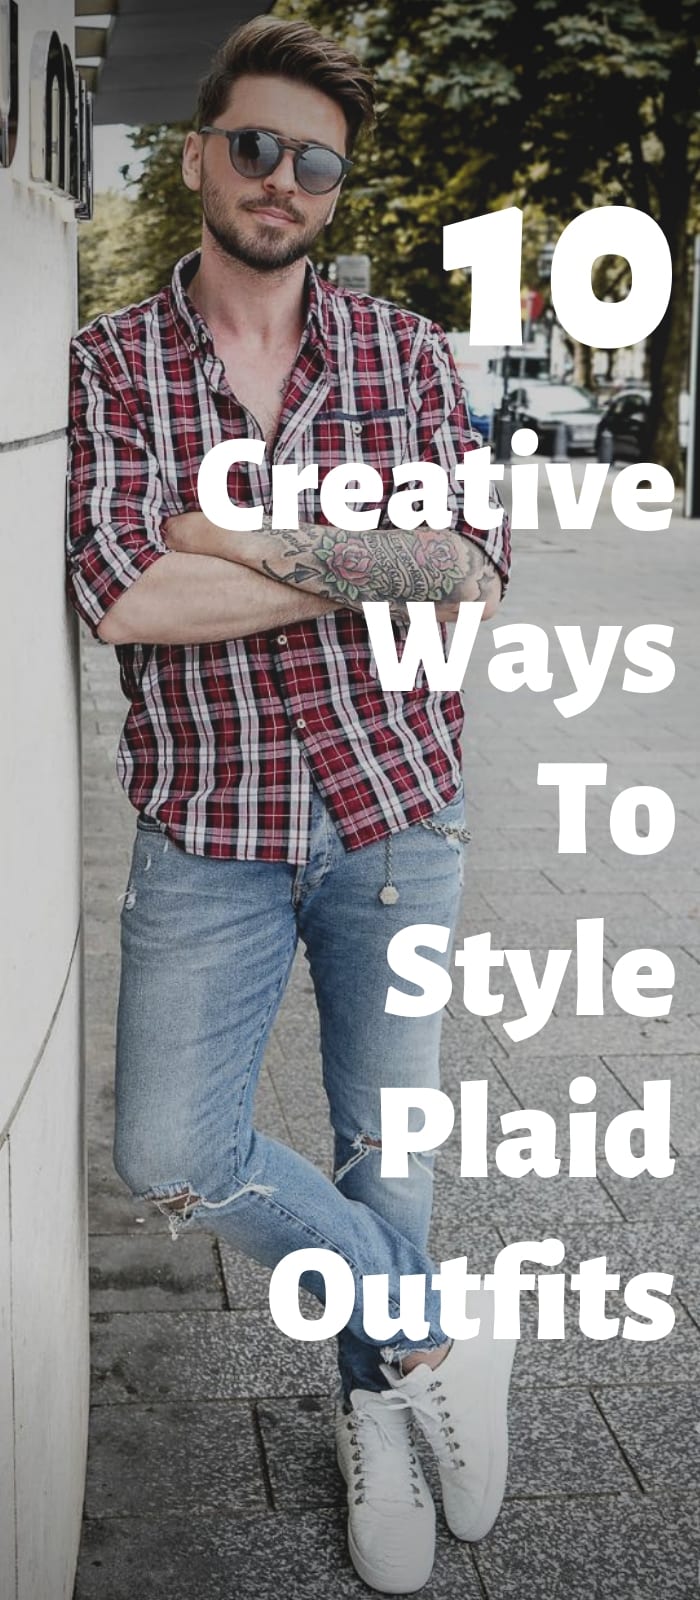 10 Creative Ways To Style Plaid Outfits!